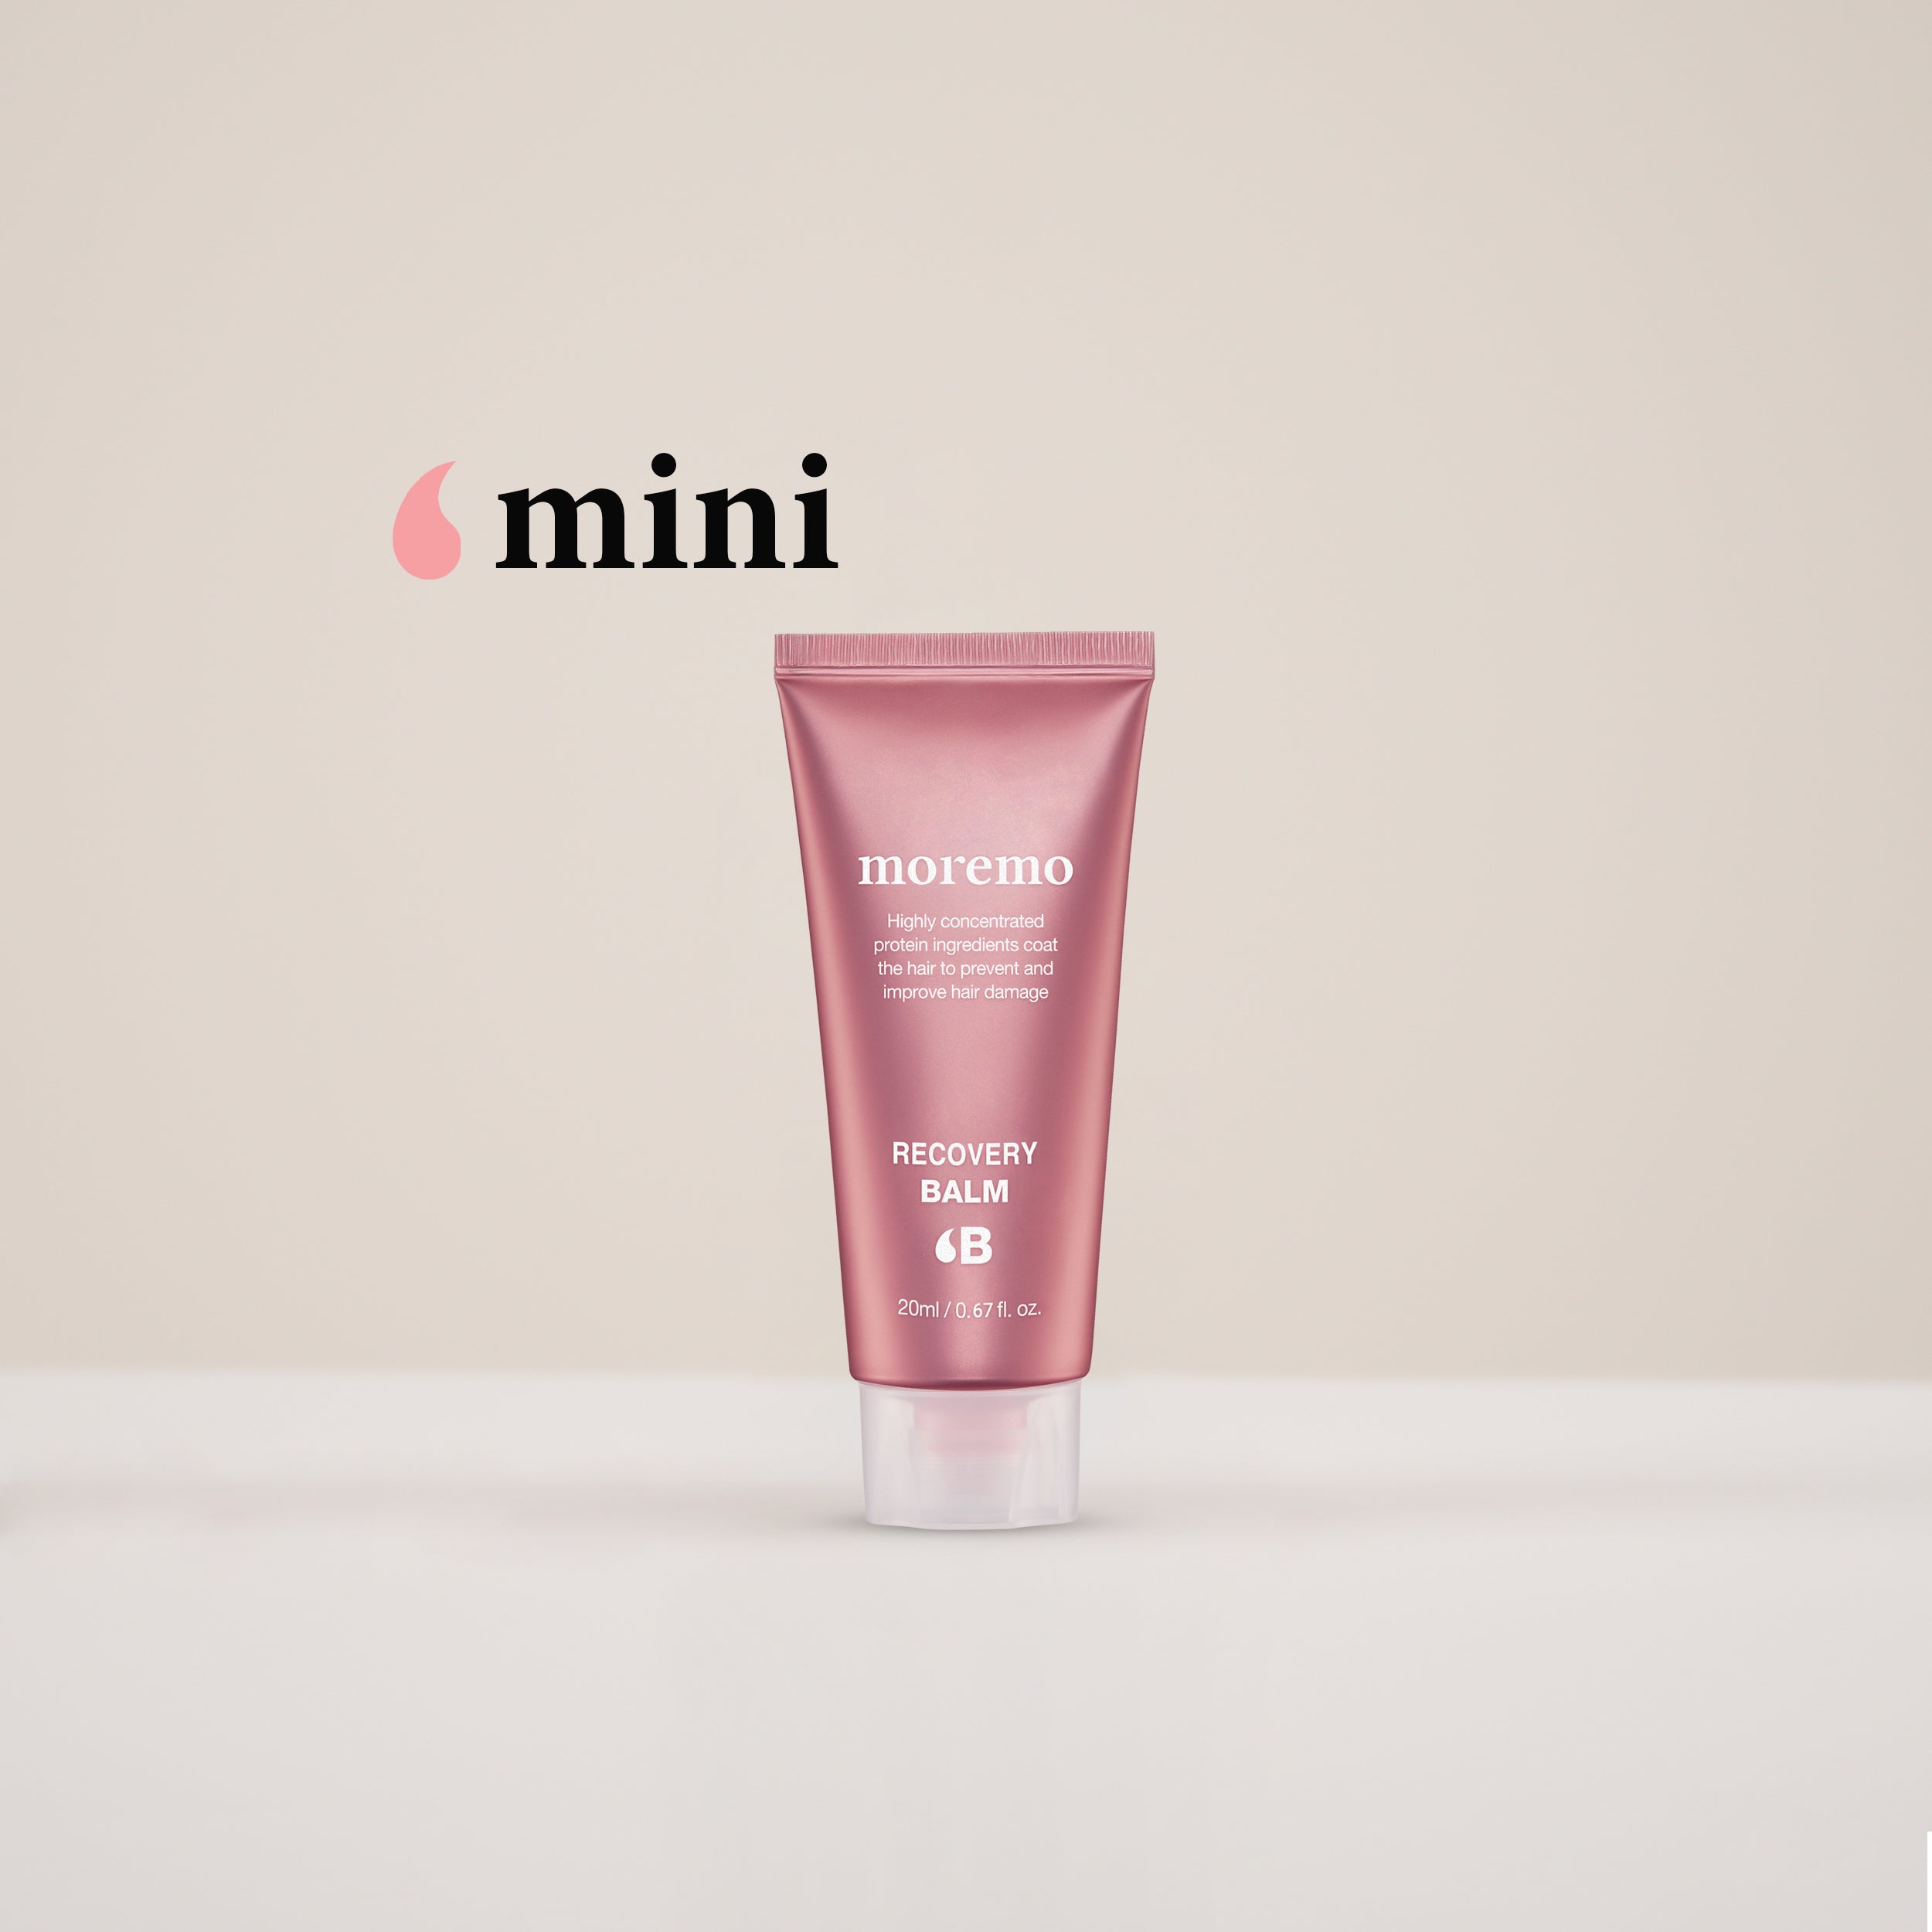 moremo RECOVERY BALM B 20ml - トリートメント